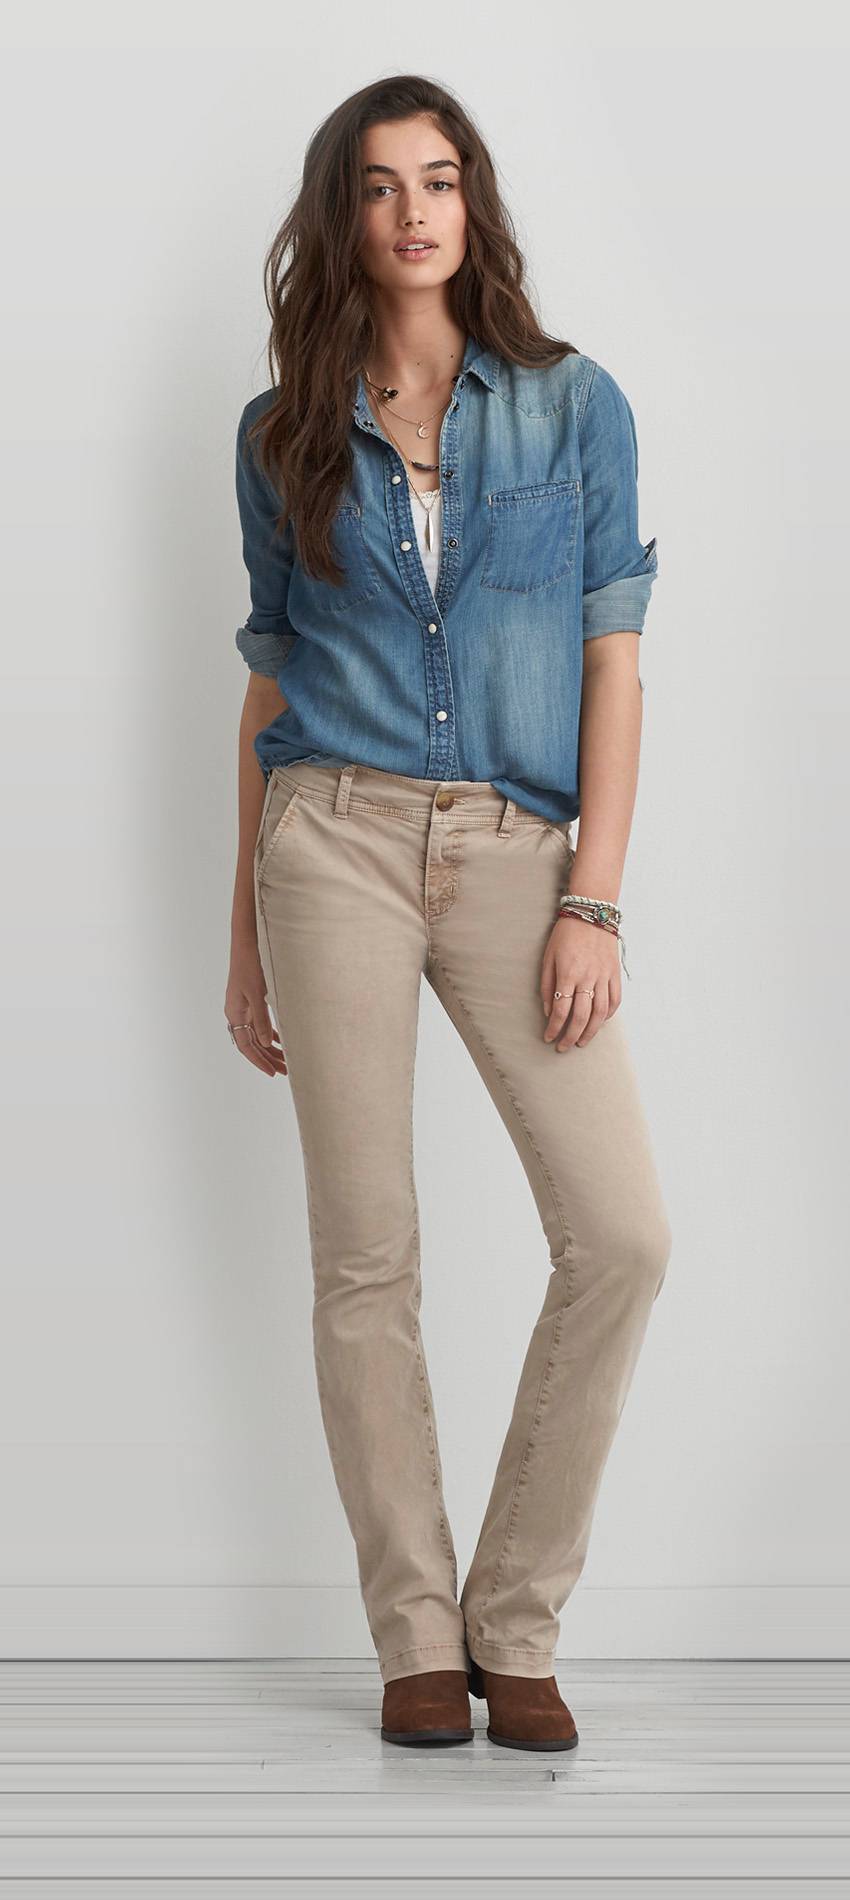 How to Wear Chinos For Women? 15 Best Outfit Ideas